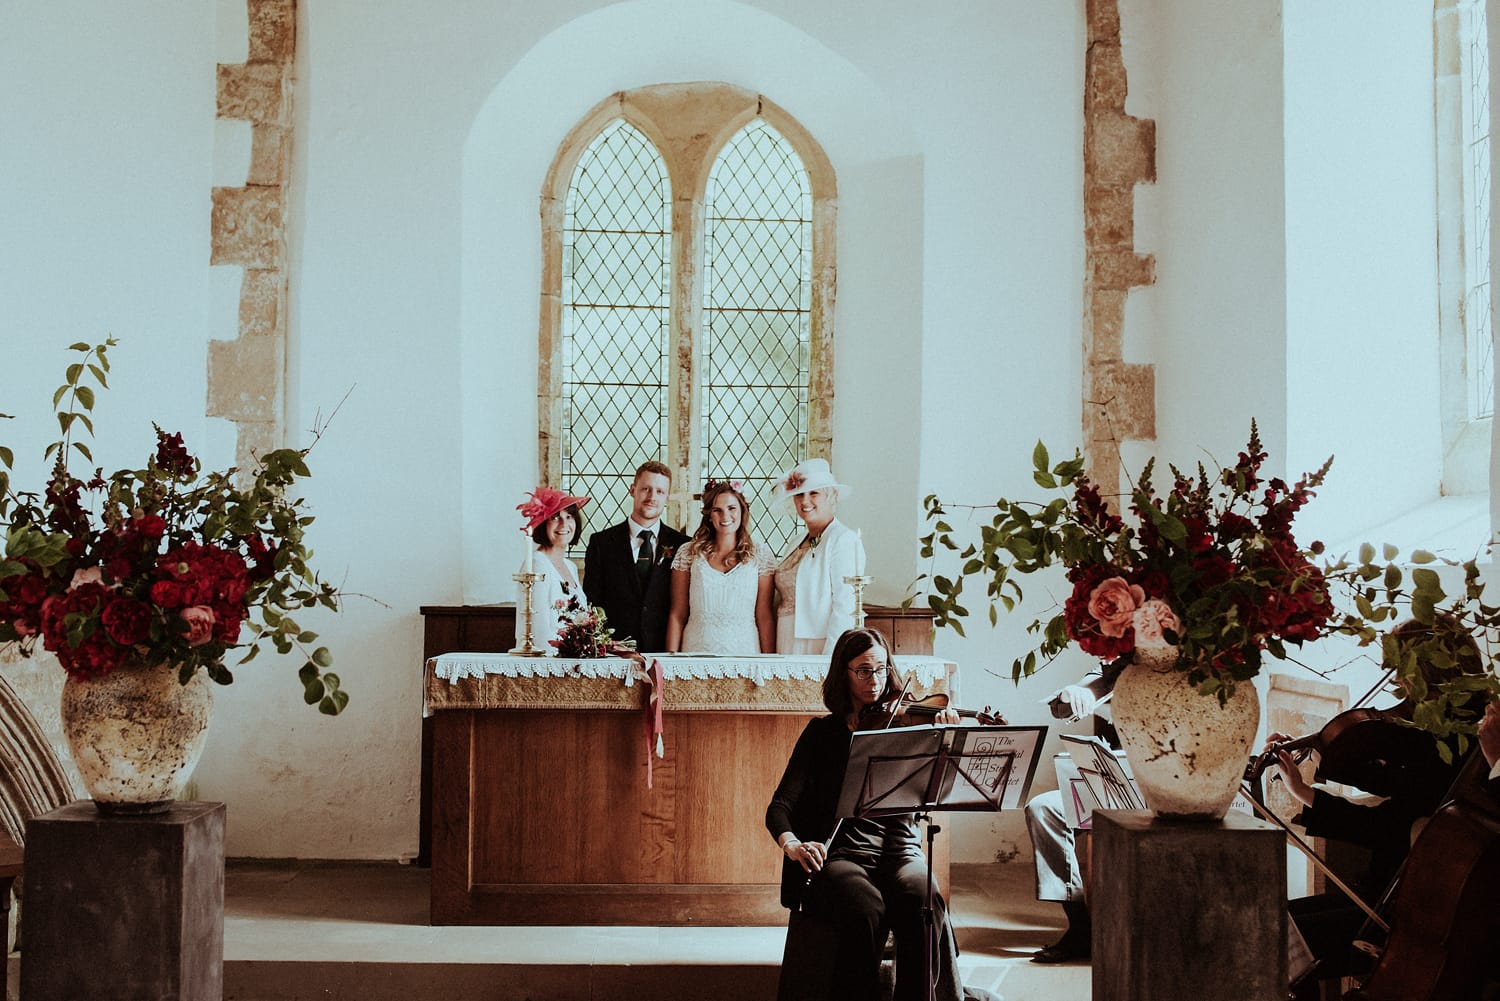 Sunny and Vintage-Inspired Wedding in Medieval Ruins - Maggie Bride Verity wearing Ettia by Maggie Sottero